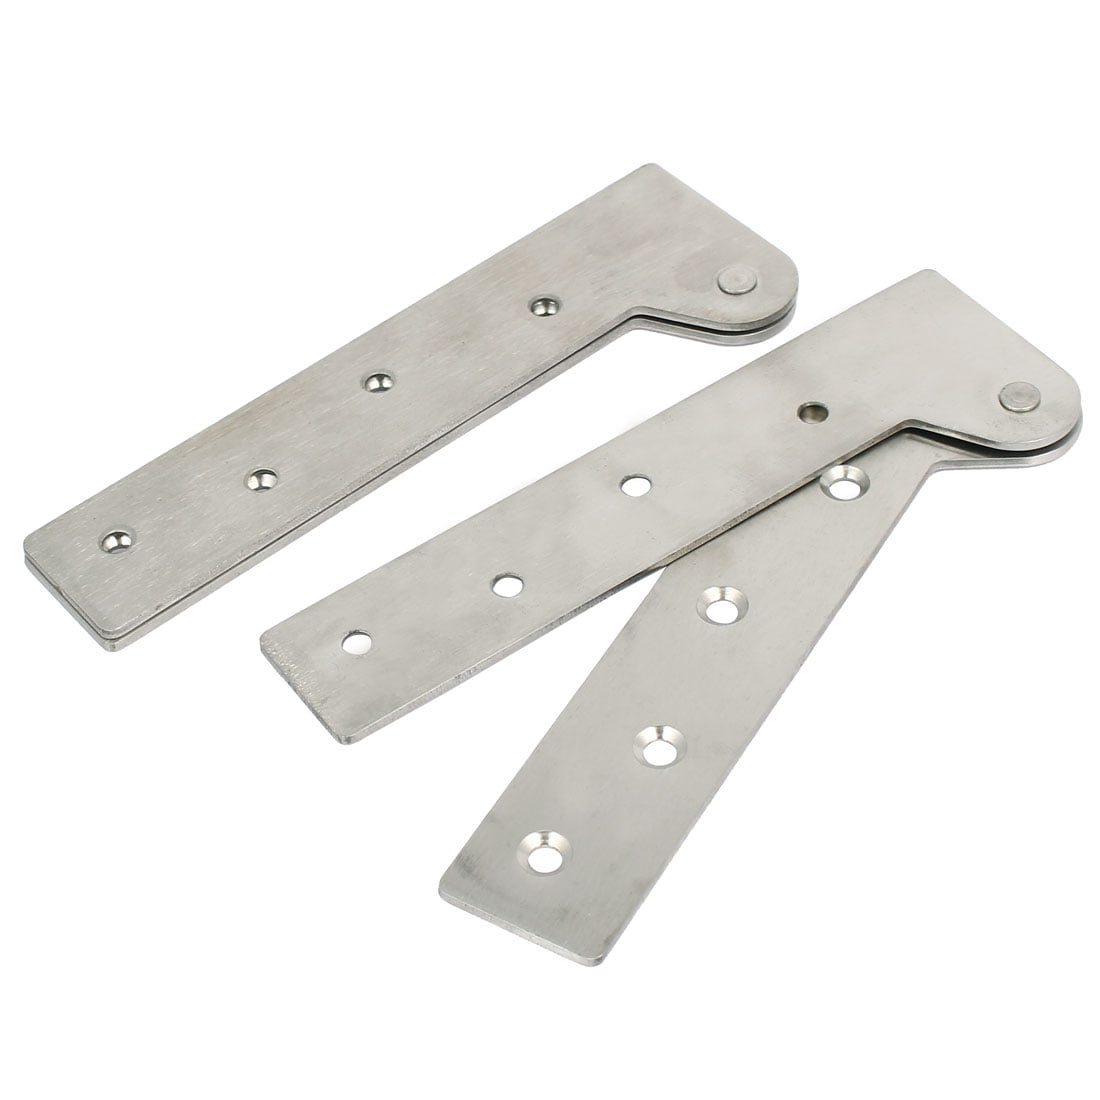 Aexit Window Door Gate Hardware 360 Degree Rotatable Pivot Hinge Silver Tone Gate Hinges 150x50x5mm 2pcs